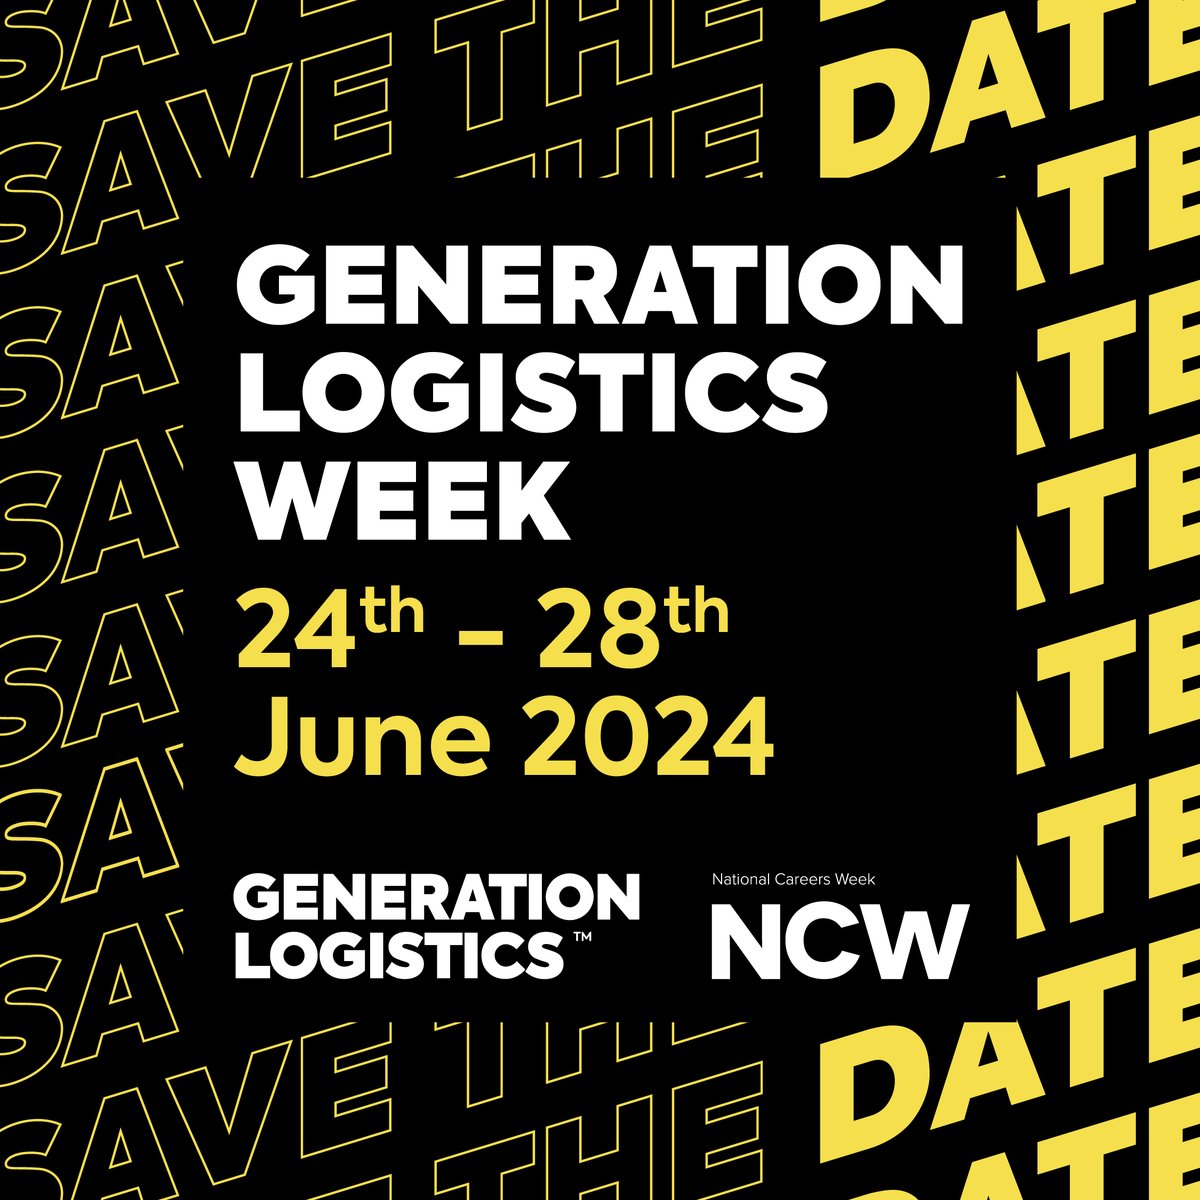 The secrets out... #GenerationLogisticsWeek is happening 24th - 28th June 🌟 In partnership with @nationalcareersweek, make sure you're following both profiles for details on the planned virtual careers fairs, fresh careers stories, in-person events and more.